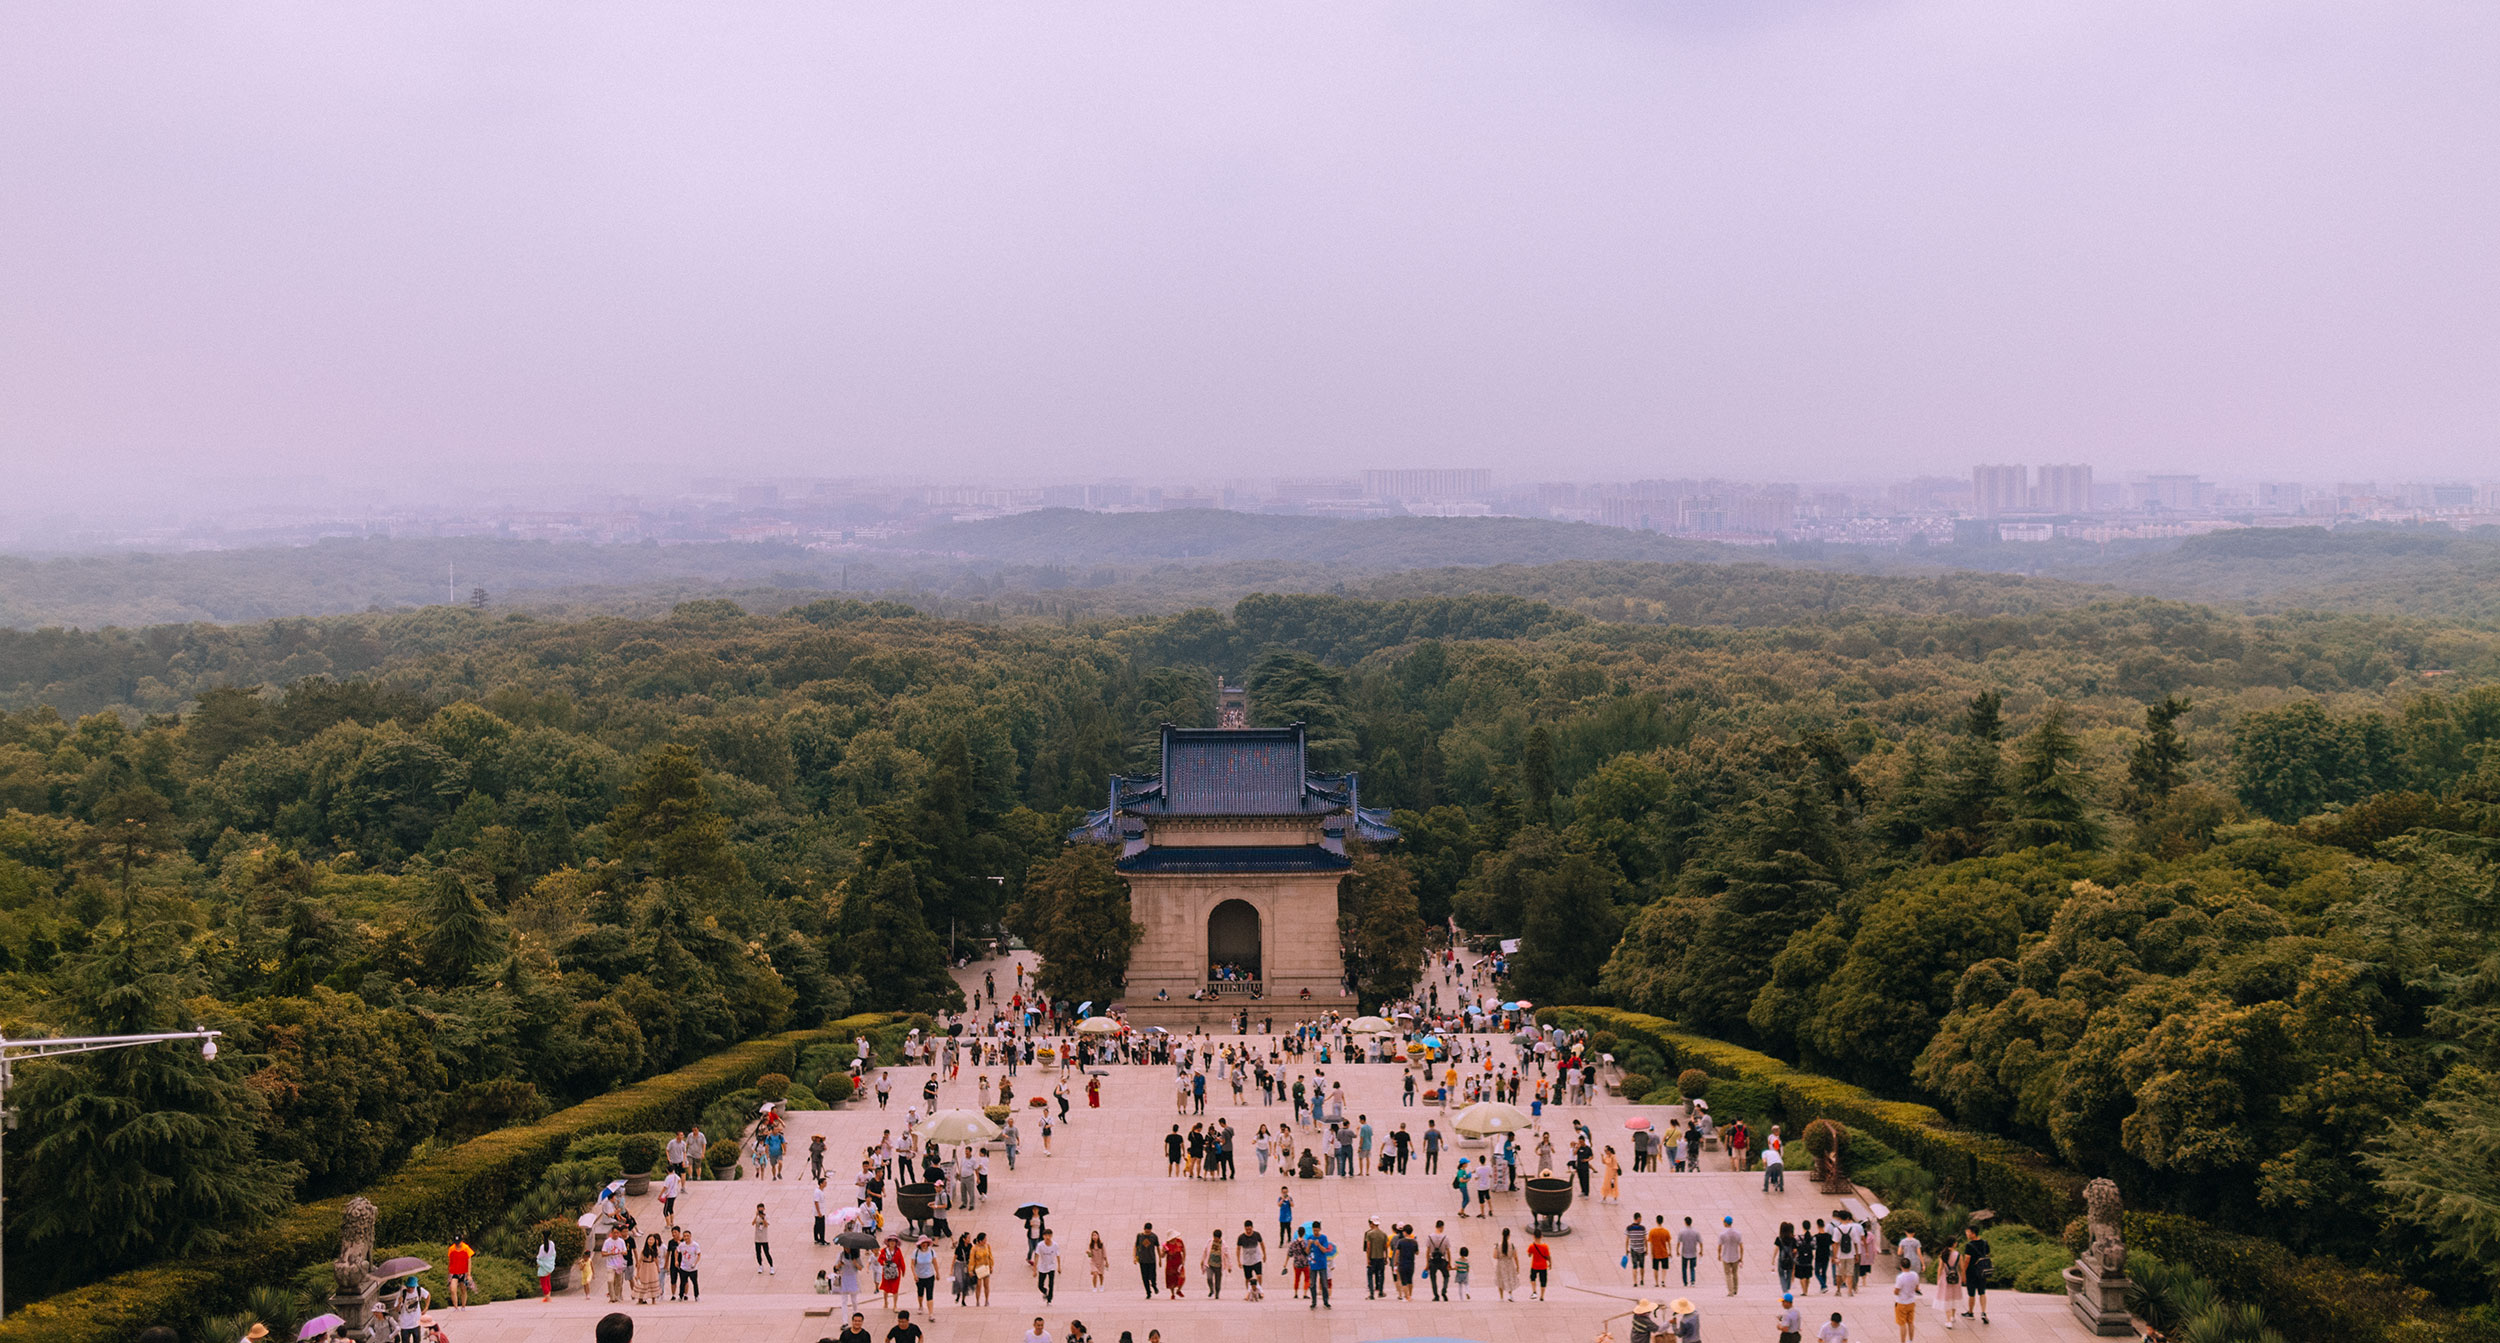 6 Must-See & Do in Nanjing, China 南京 / China Travel Guide by Alice M. Huynh - iHeartAlice.com / Sun Yat-Sen Mausoleum, Nanjing